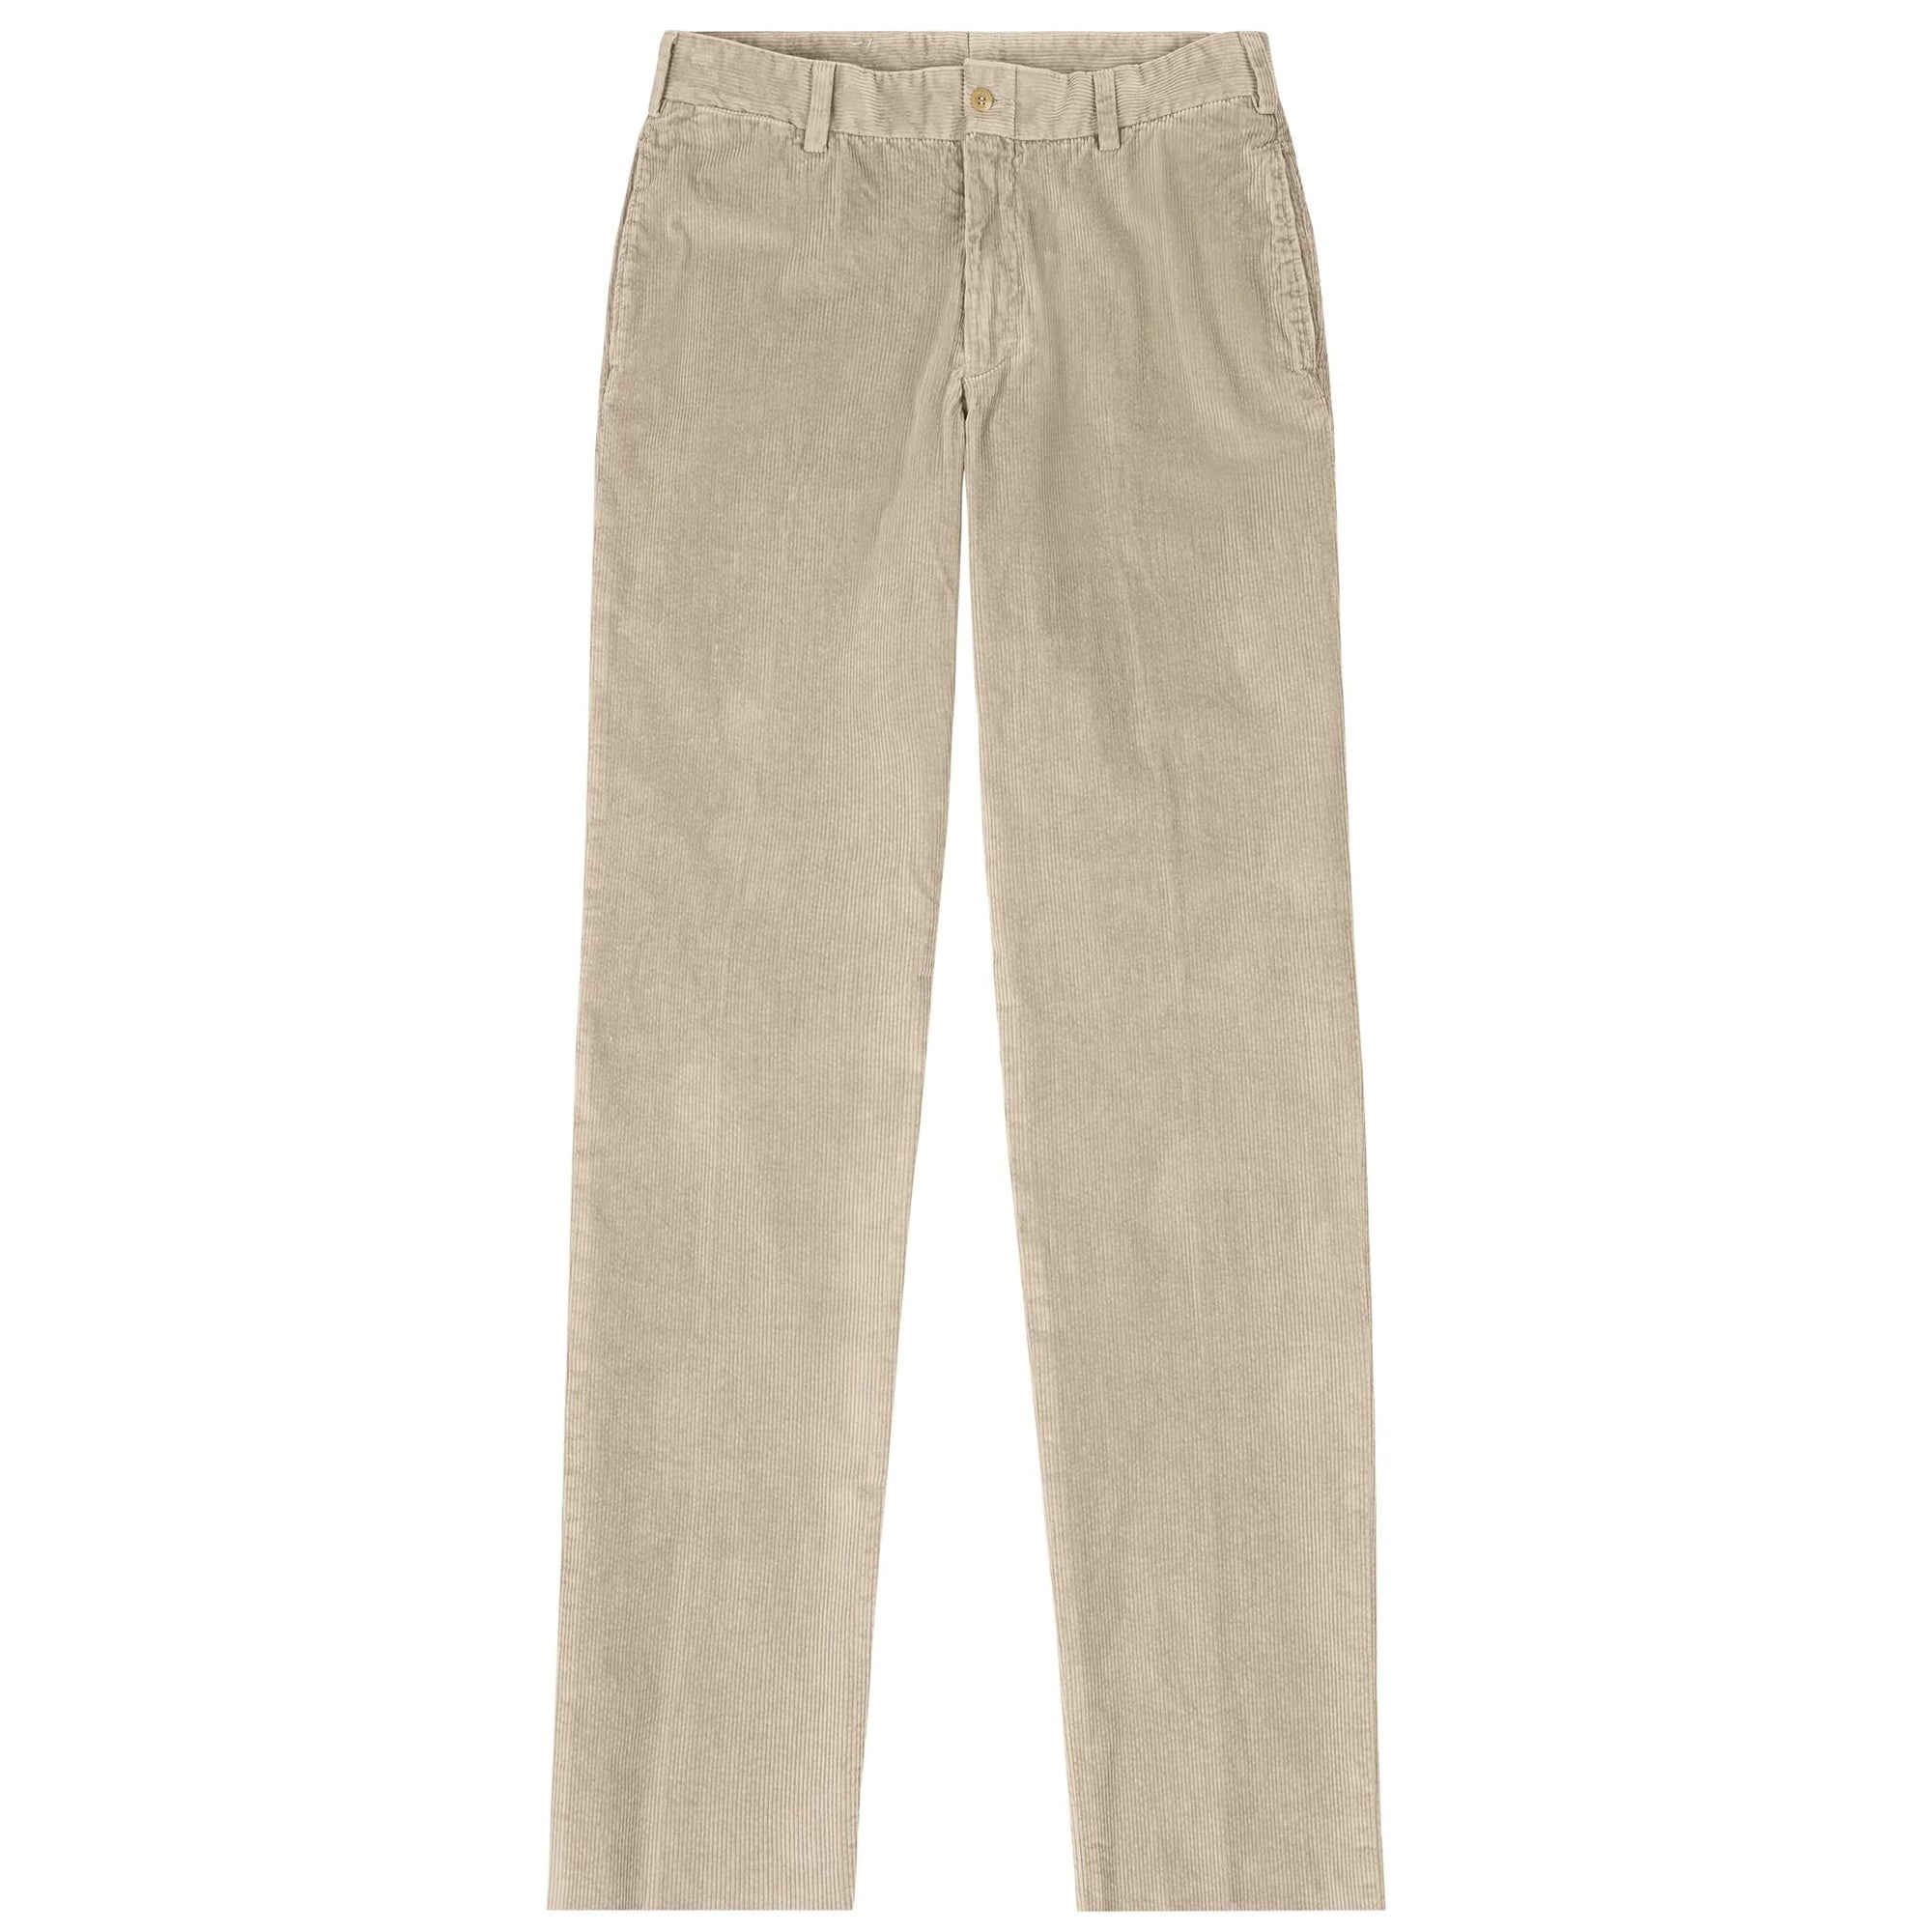 M2 Classic Fit Stretch 9 Wale Cords in Khaki by Bills Khakis